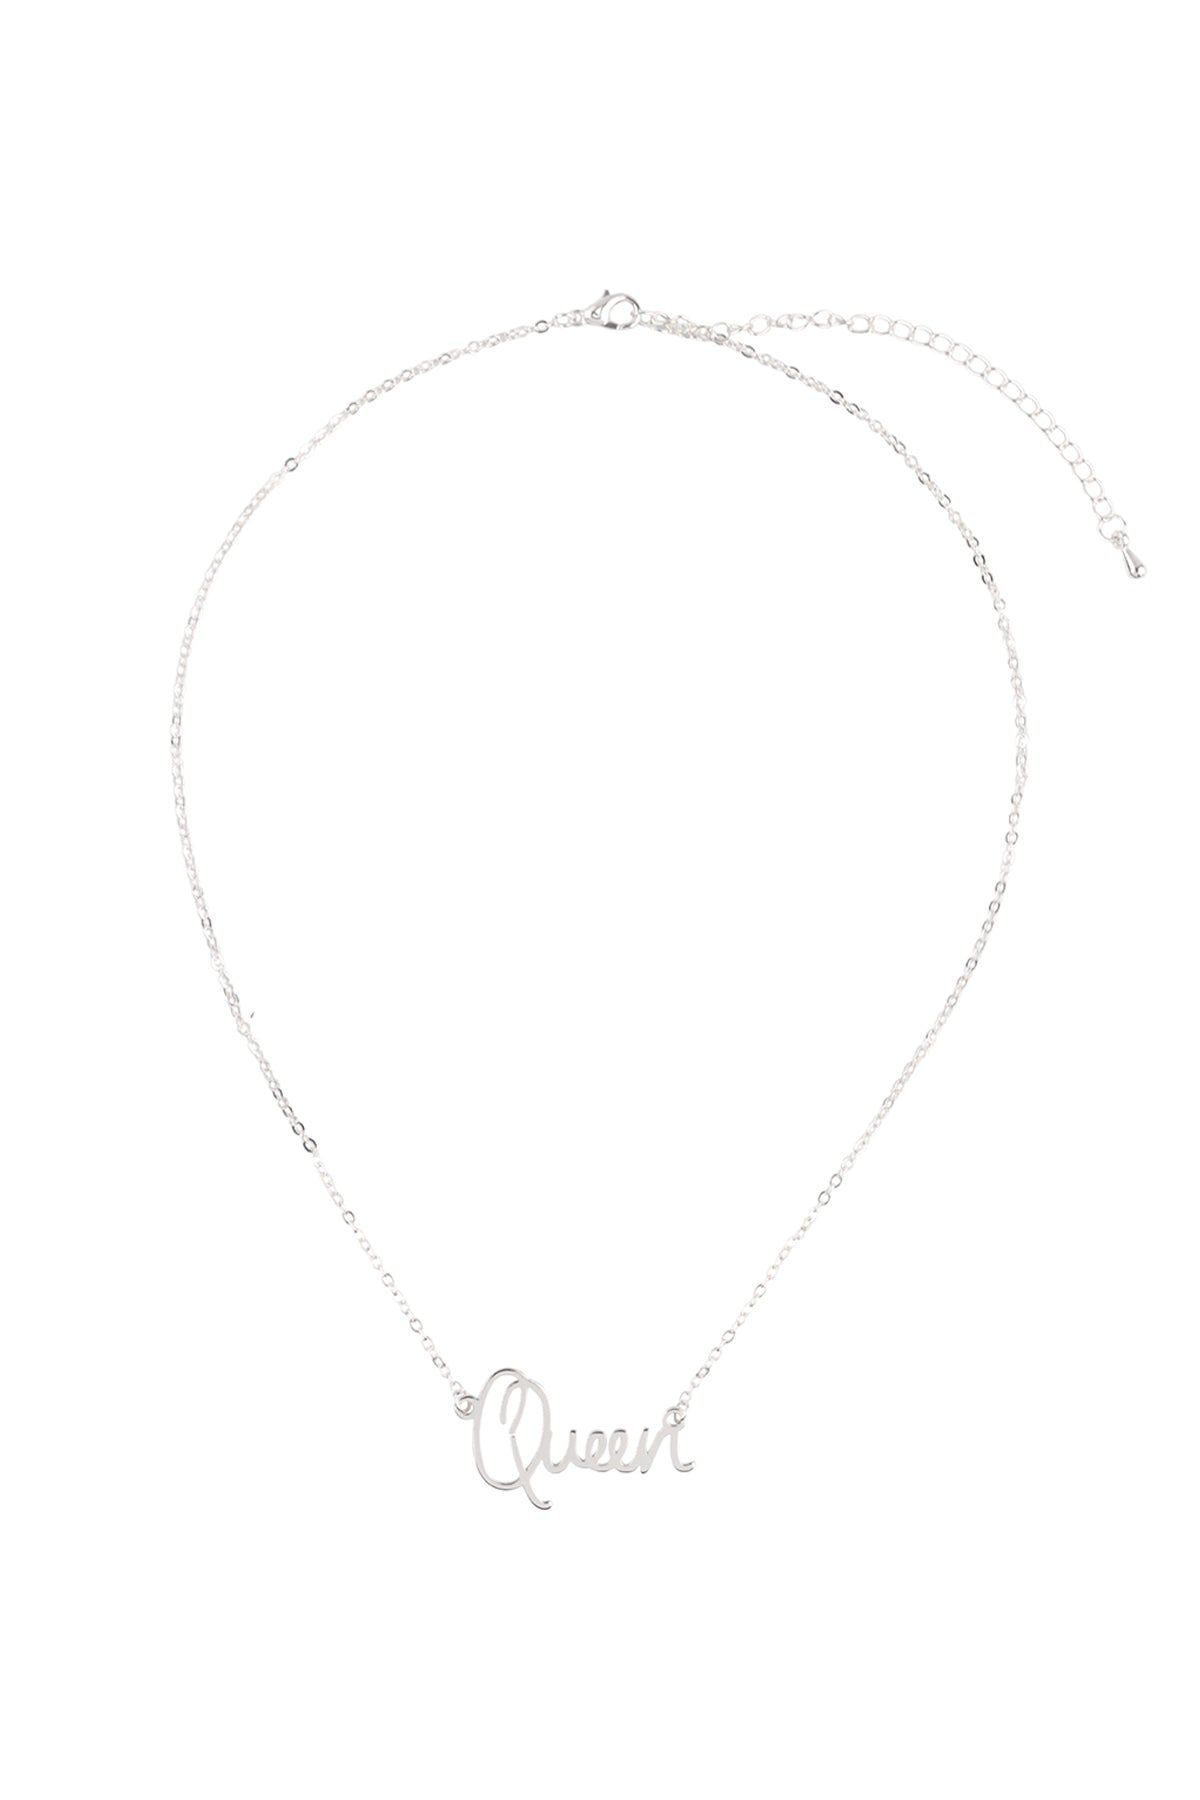 "QUEEN" PERSONALIZED CHARM PENDANT LONG NECKLACE